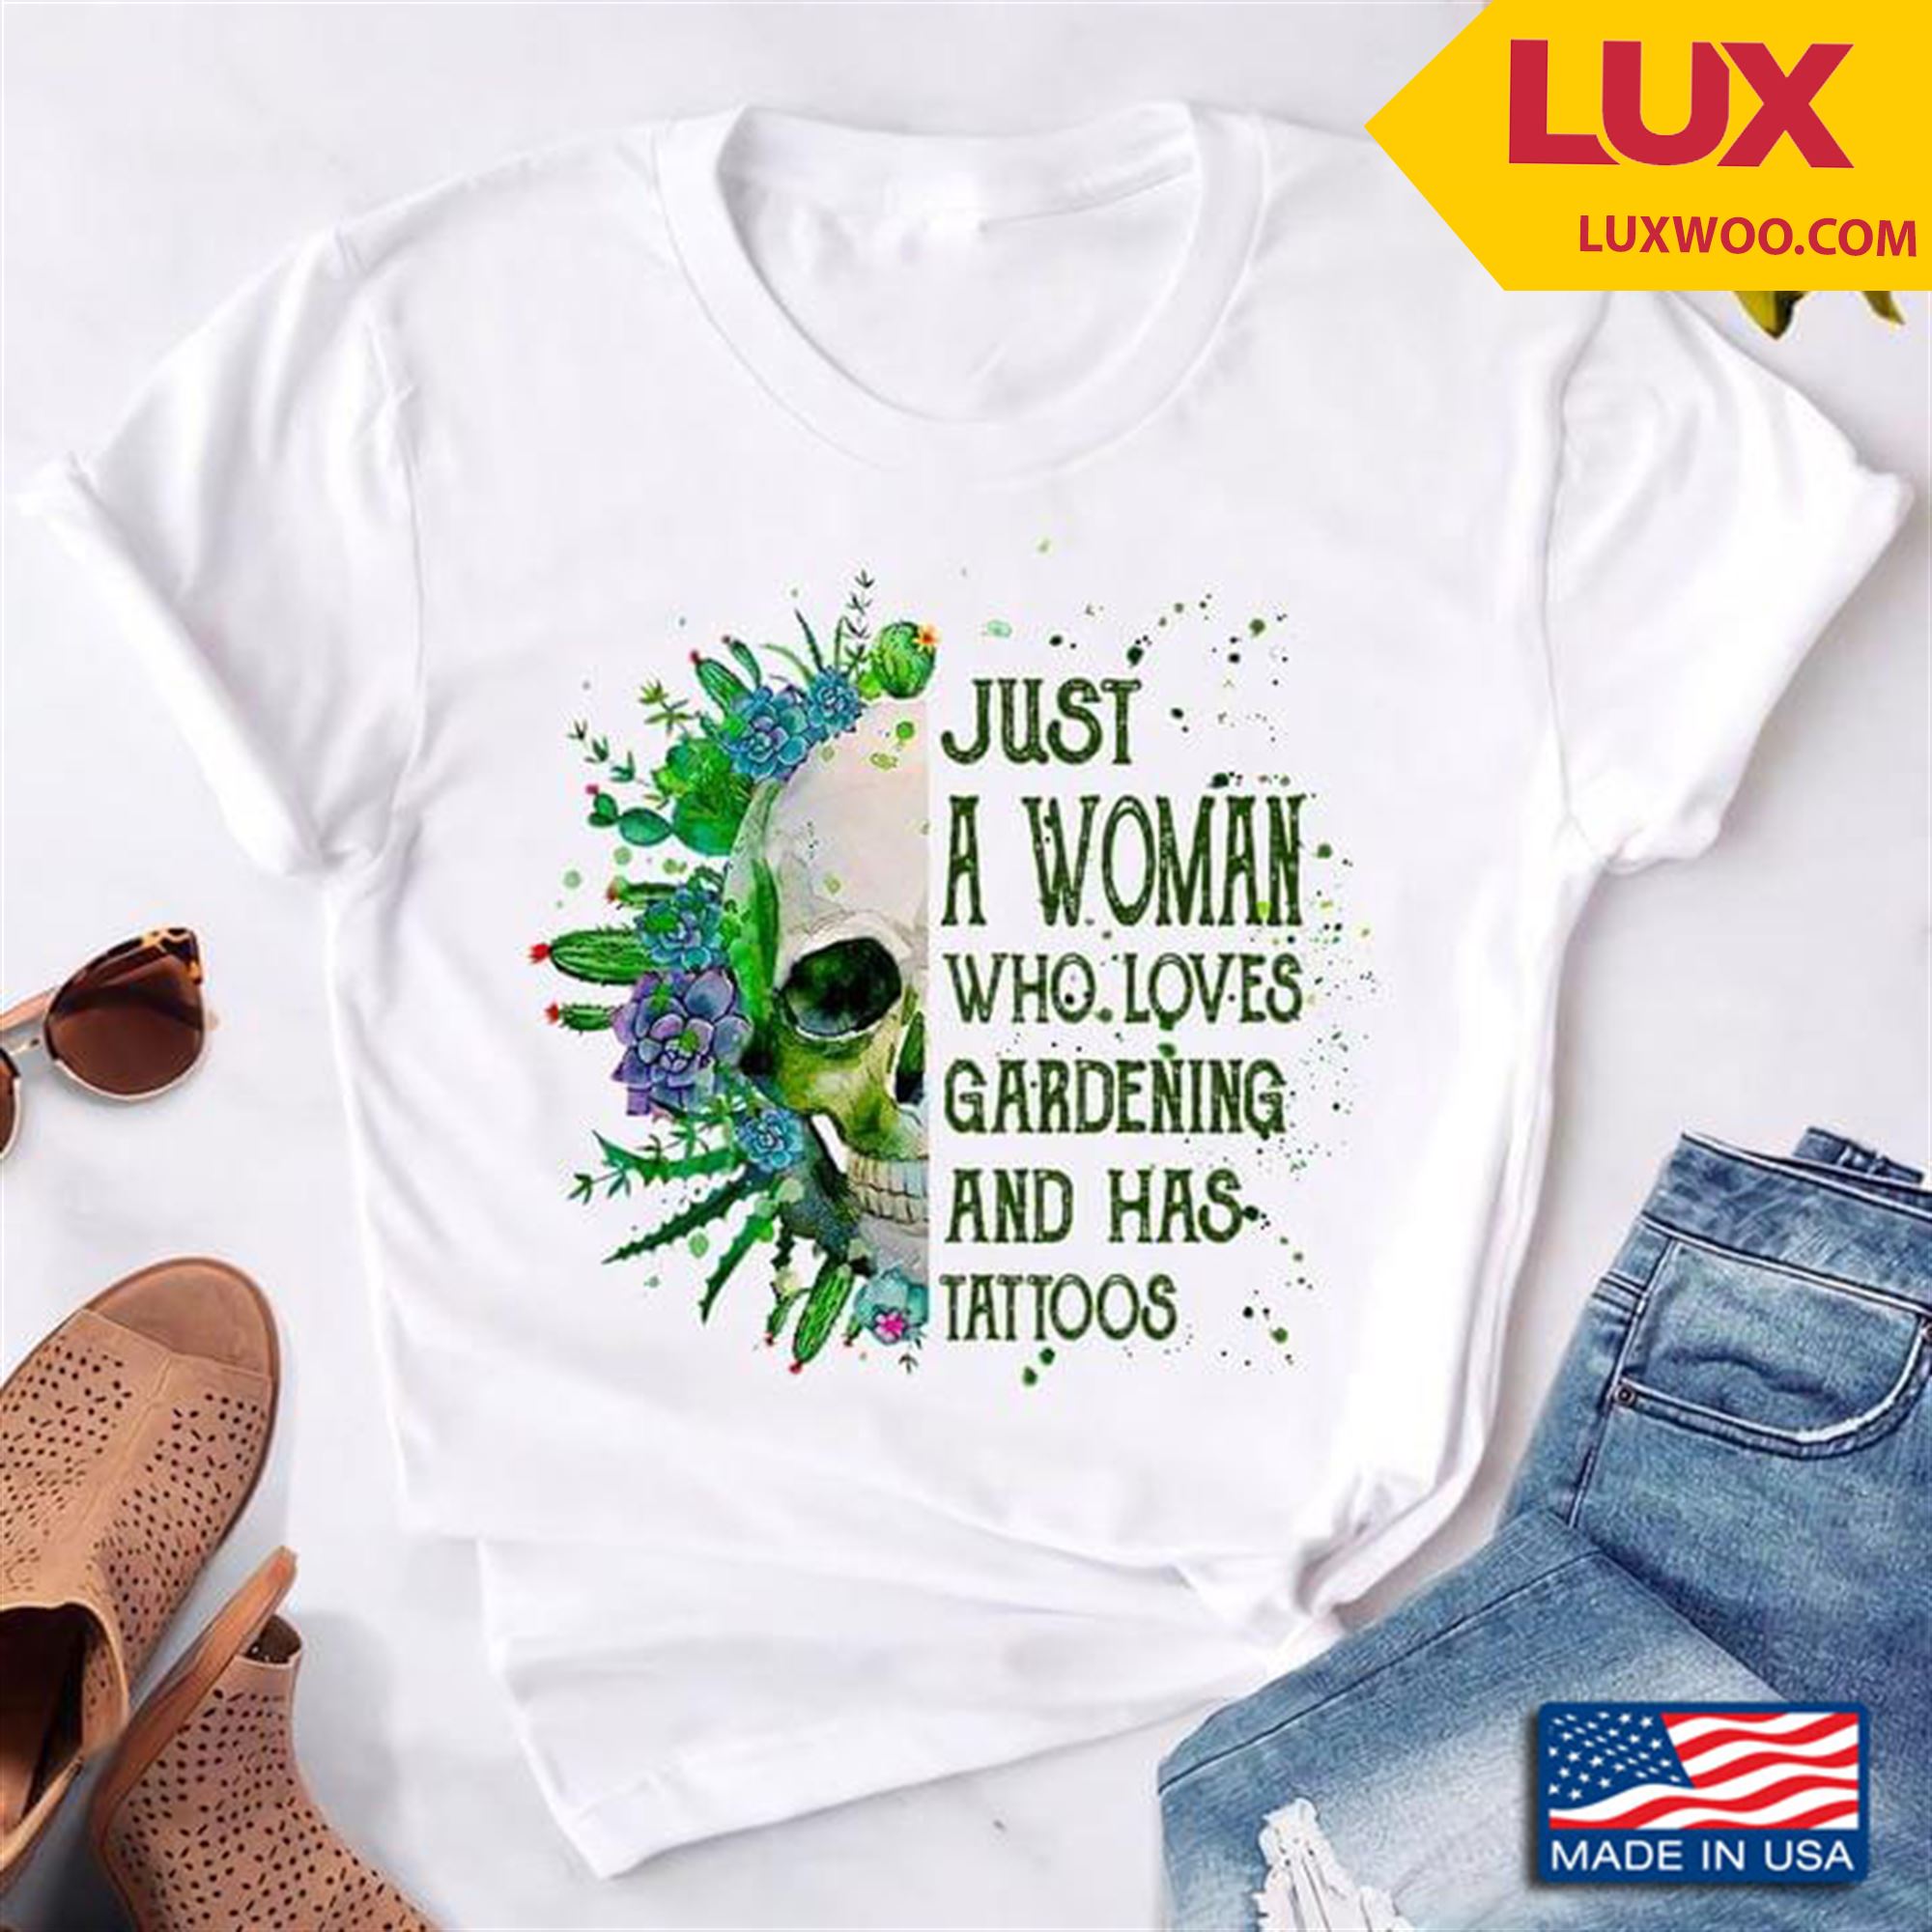 Just A Woman Who Loves Gardening And Has Tattoos Shirt Size Up To 5xl